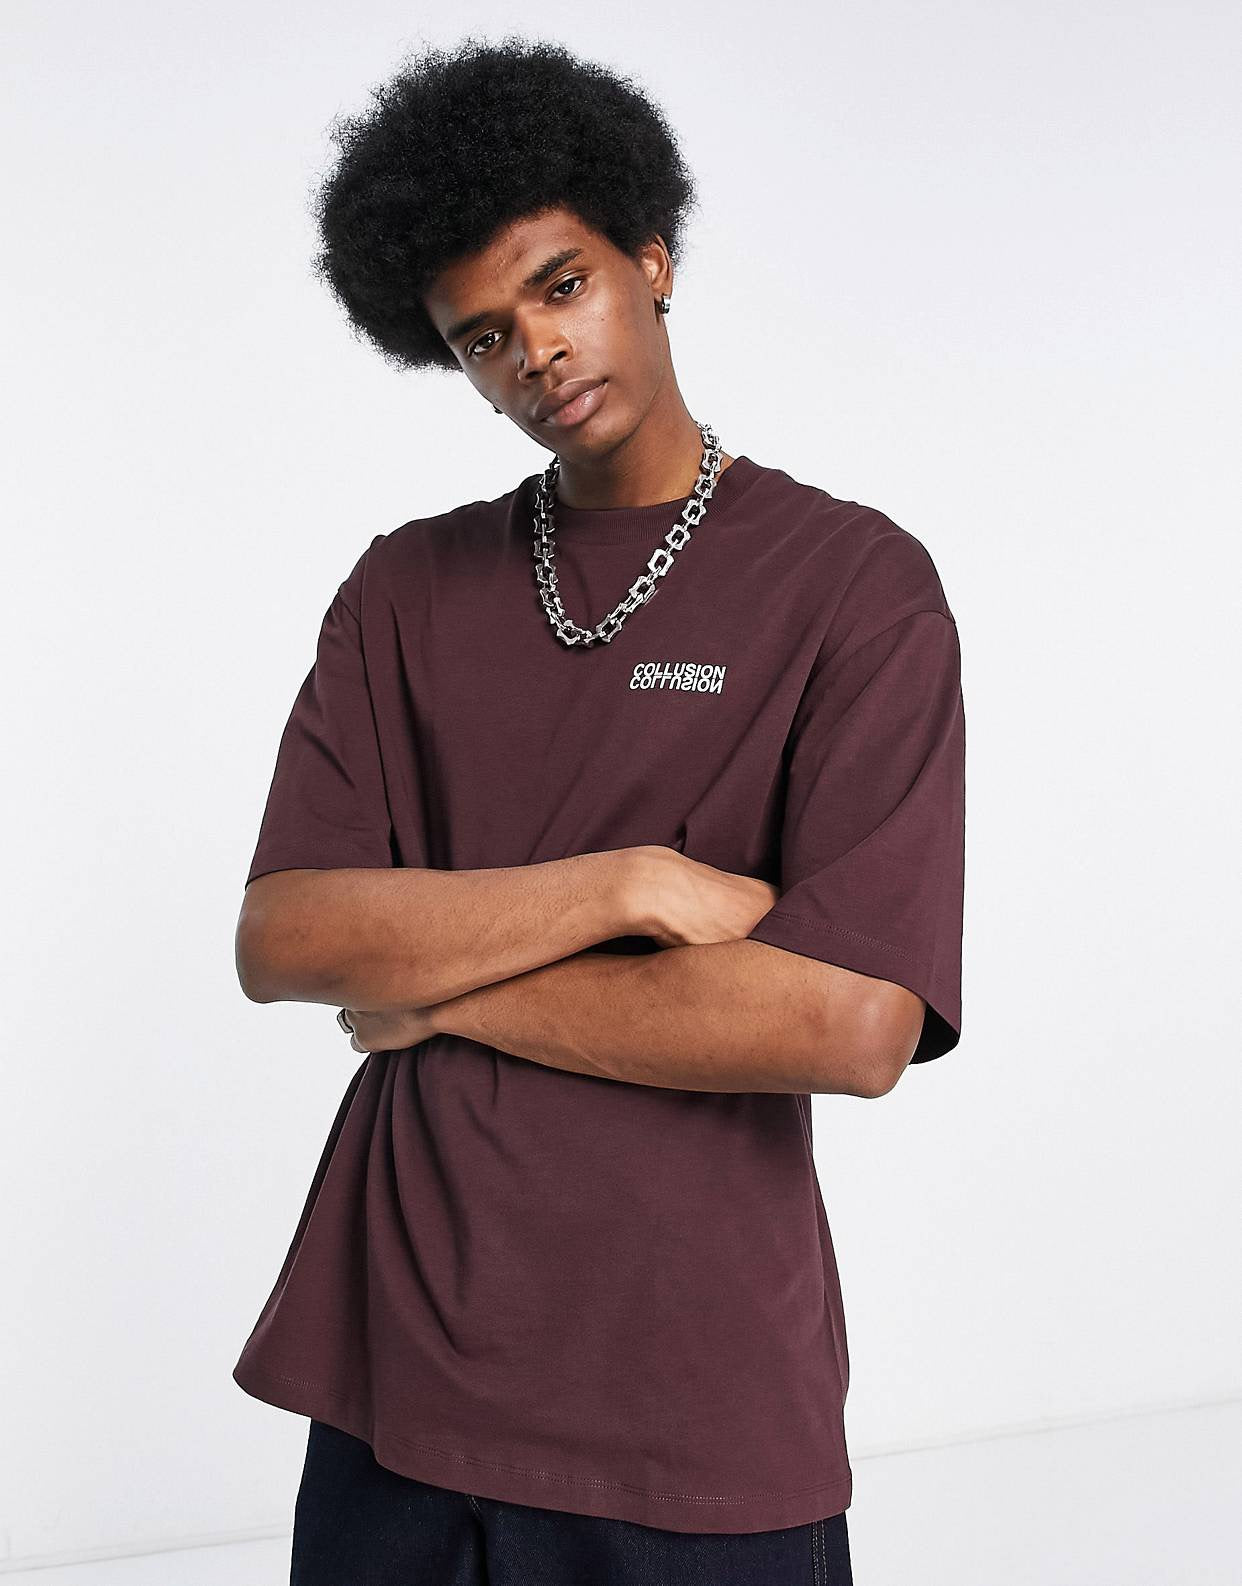 COLLUSION t-shirt in brown